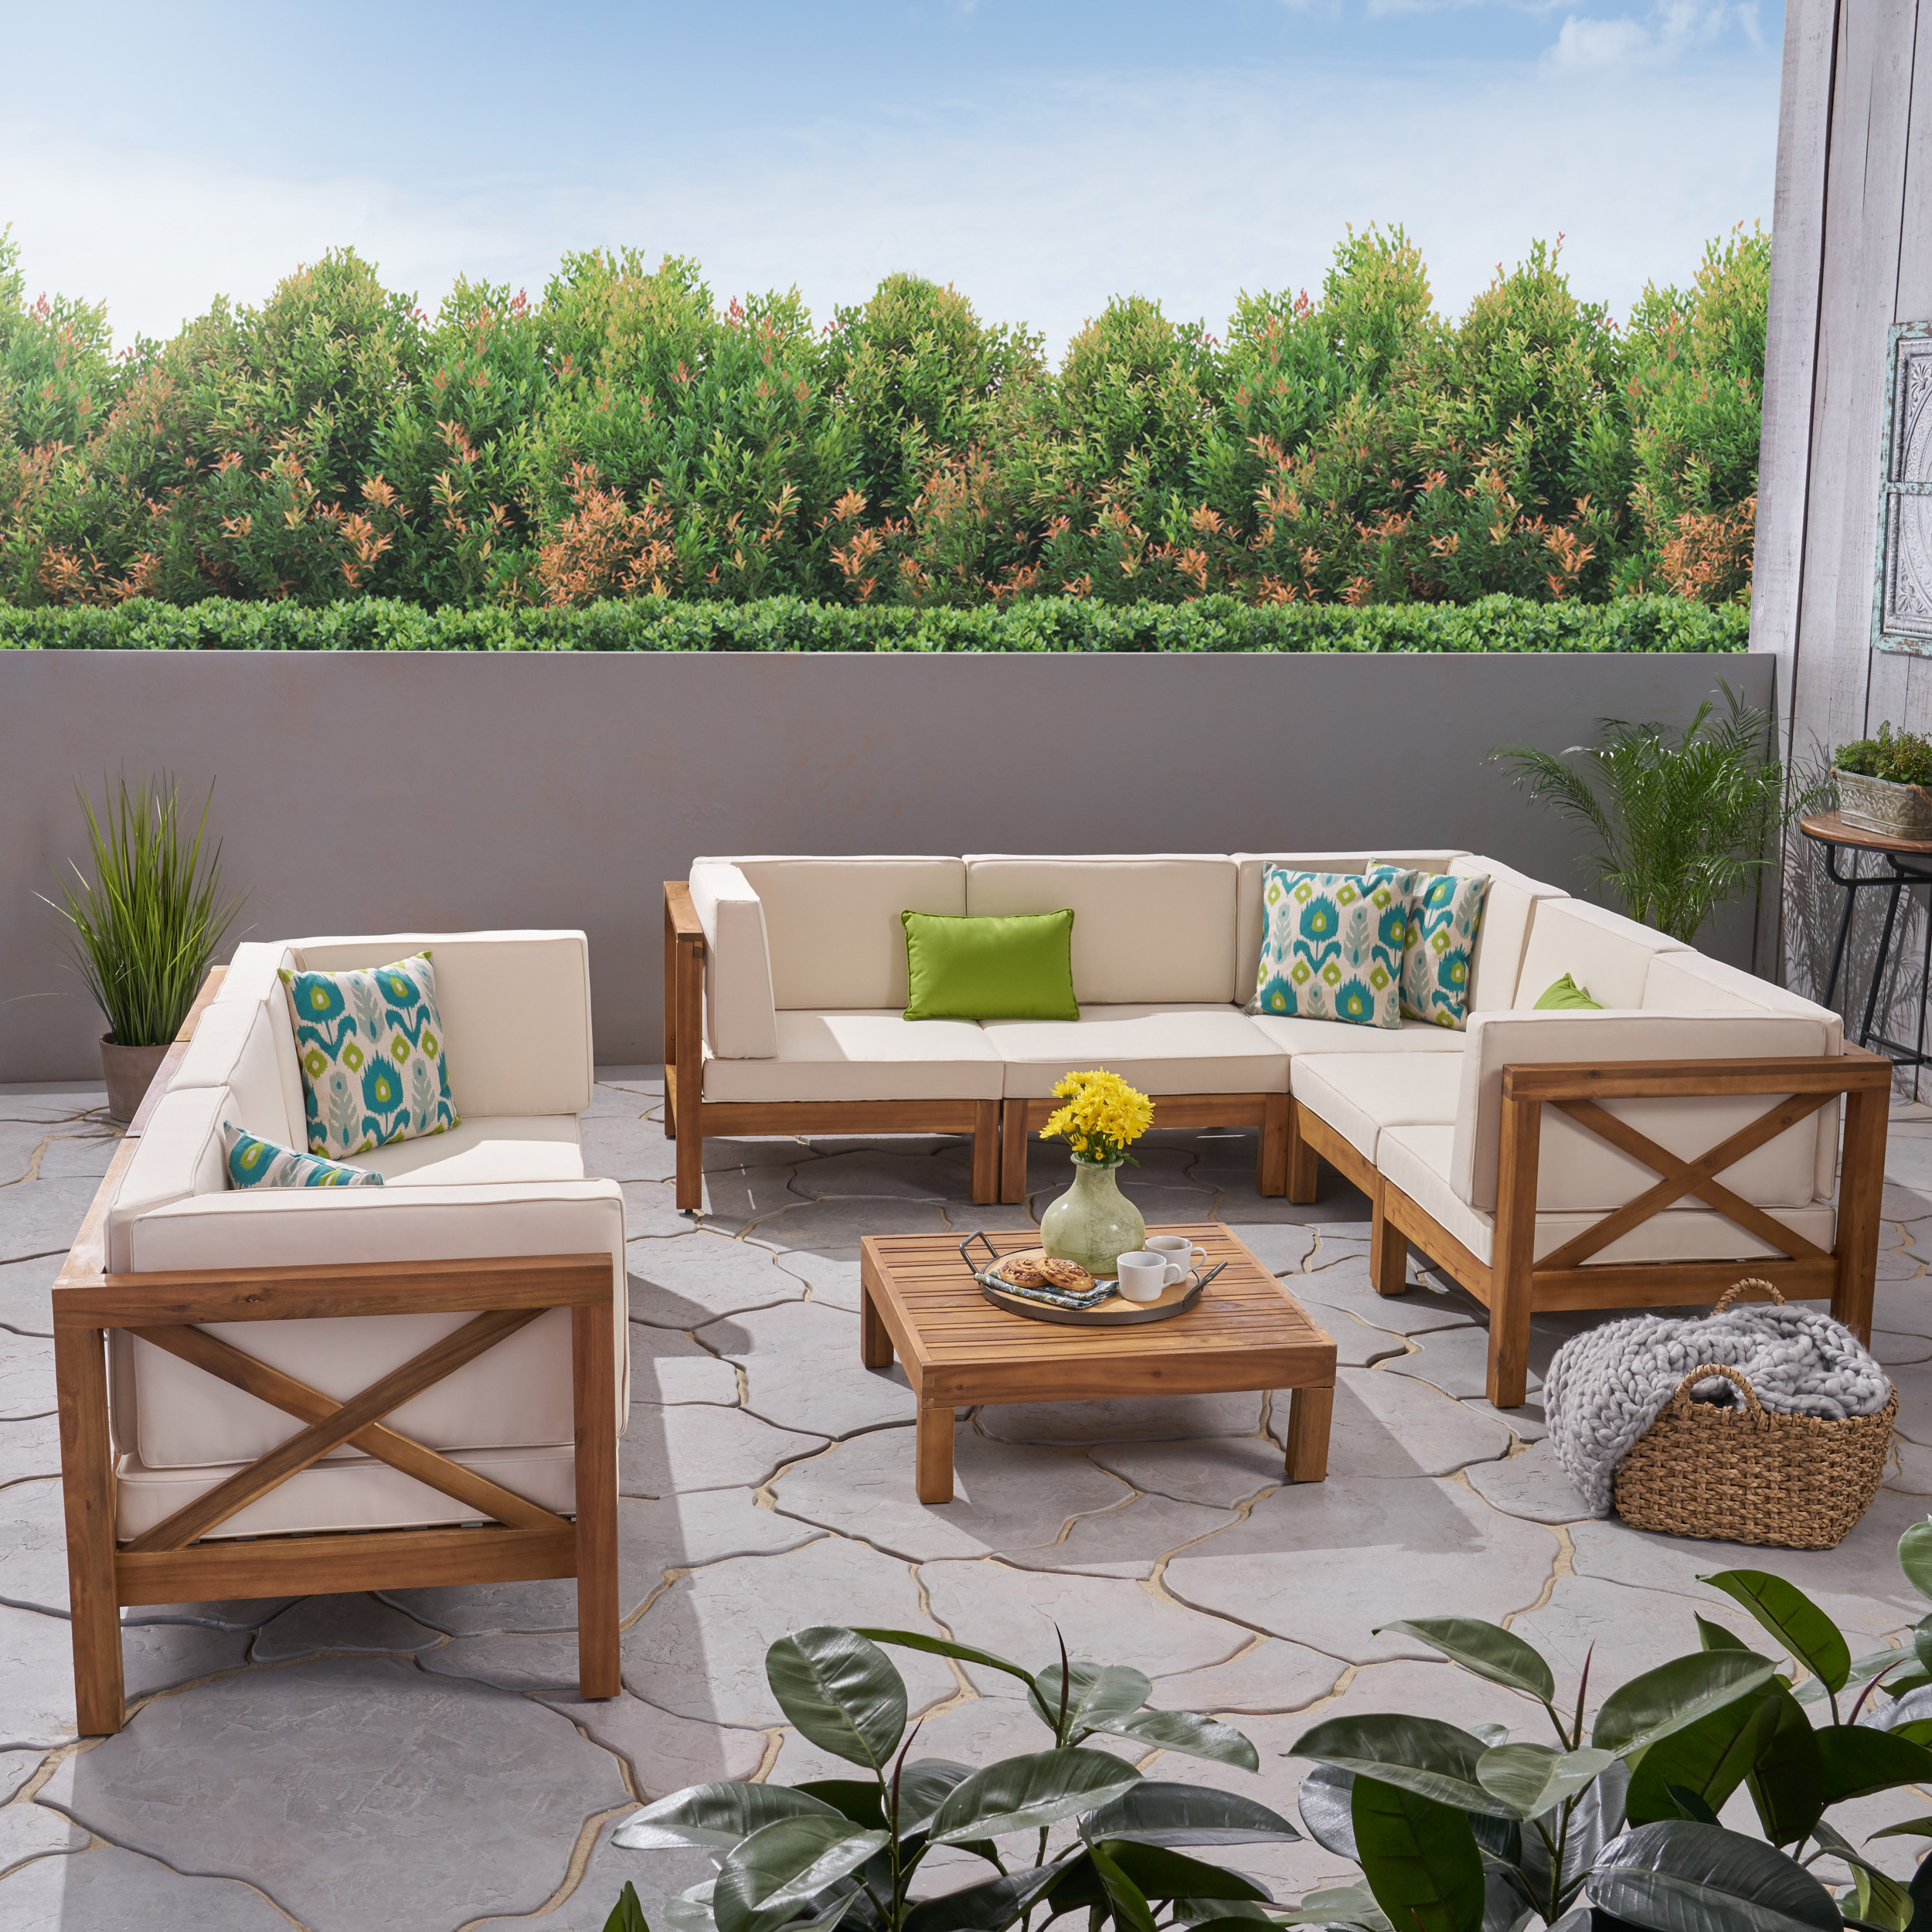 Cytheria Outdoor Acacia Wood 8 Seater Sectional Sofa Set With Coffee Table - Gray / Dark Gray